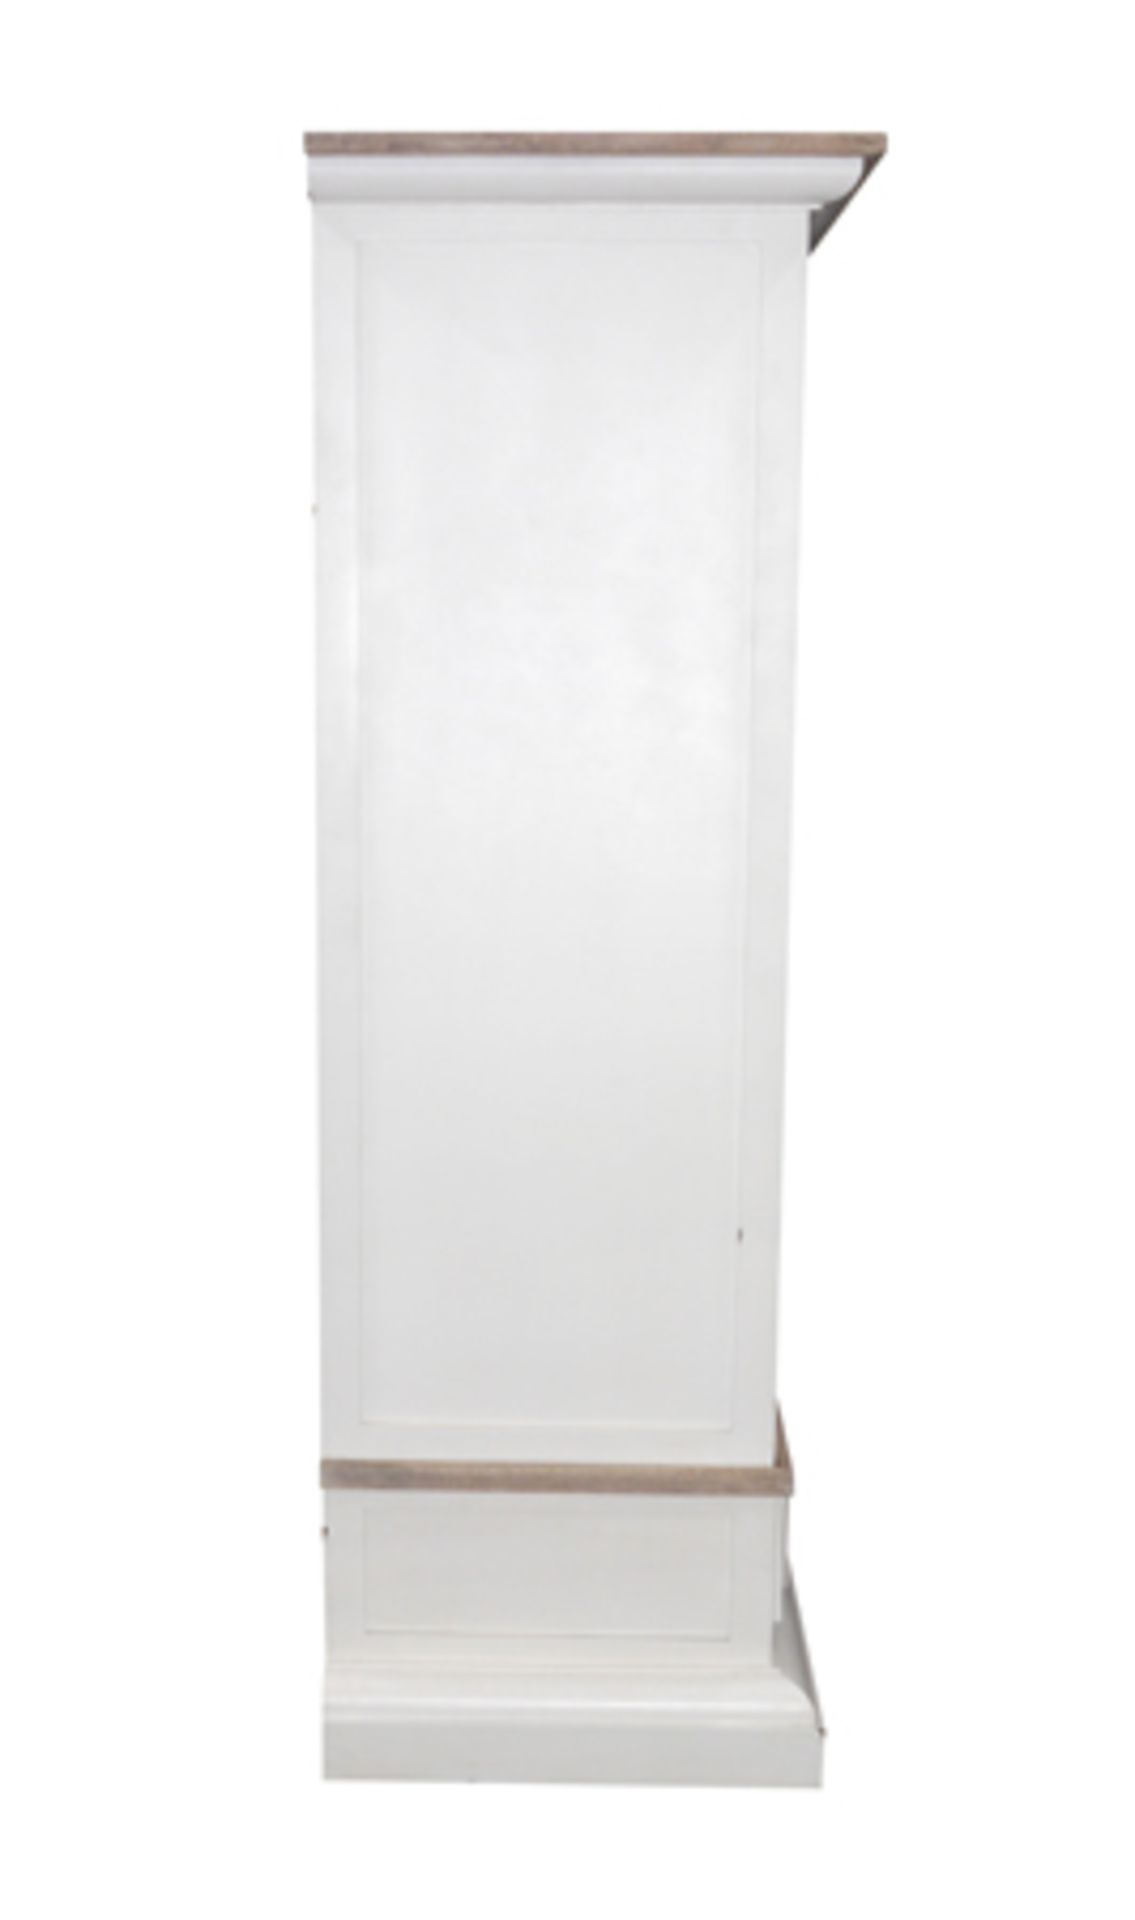 Cottonwood Wardrobe 2 Door Antique White The Cottonwood Finish Adds A Fresh And Tranquil Appeal To - Image 4 of 4